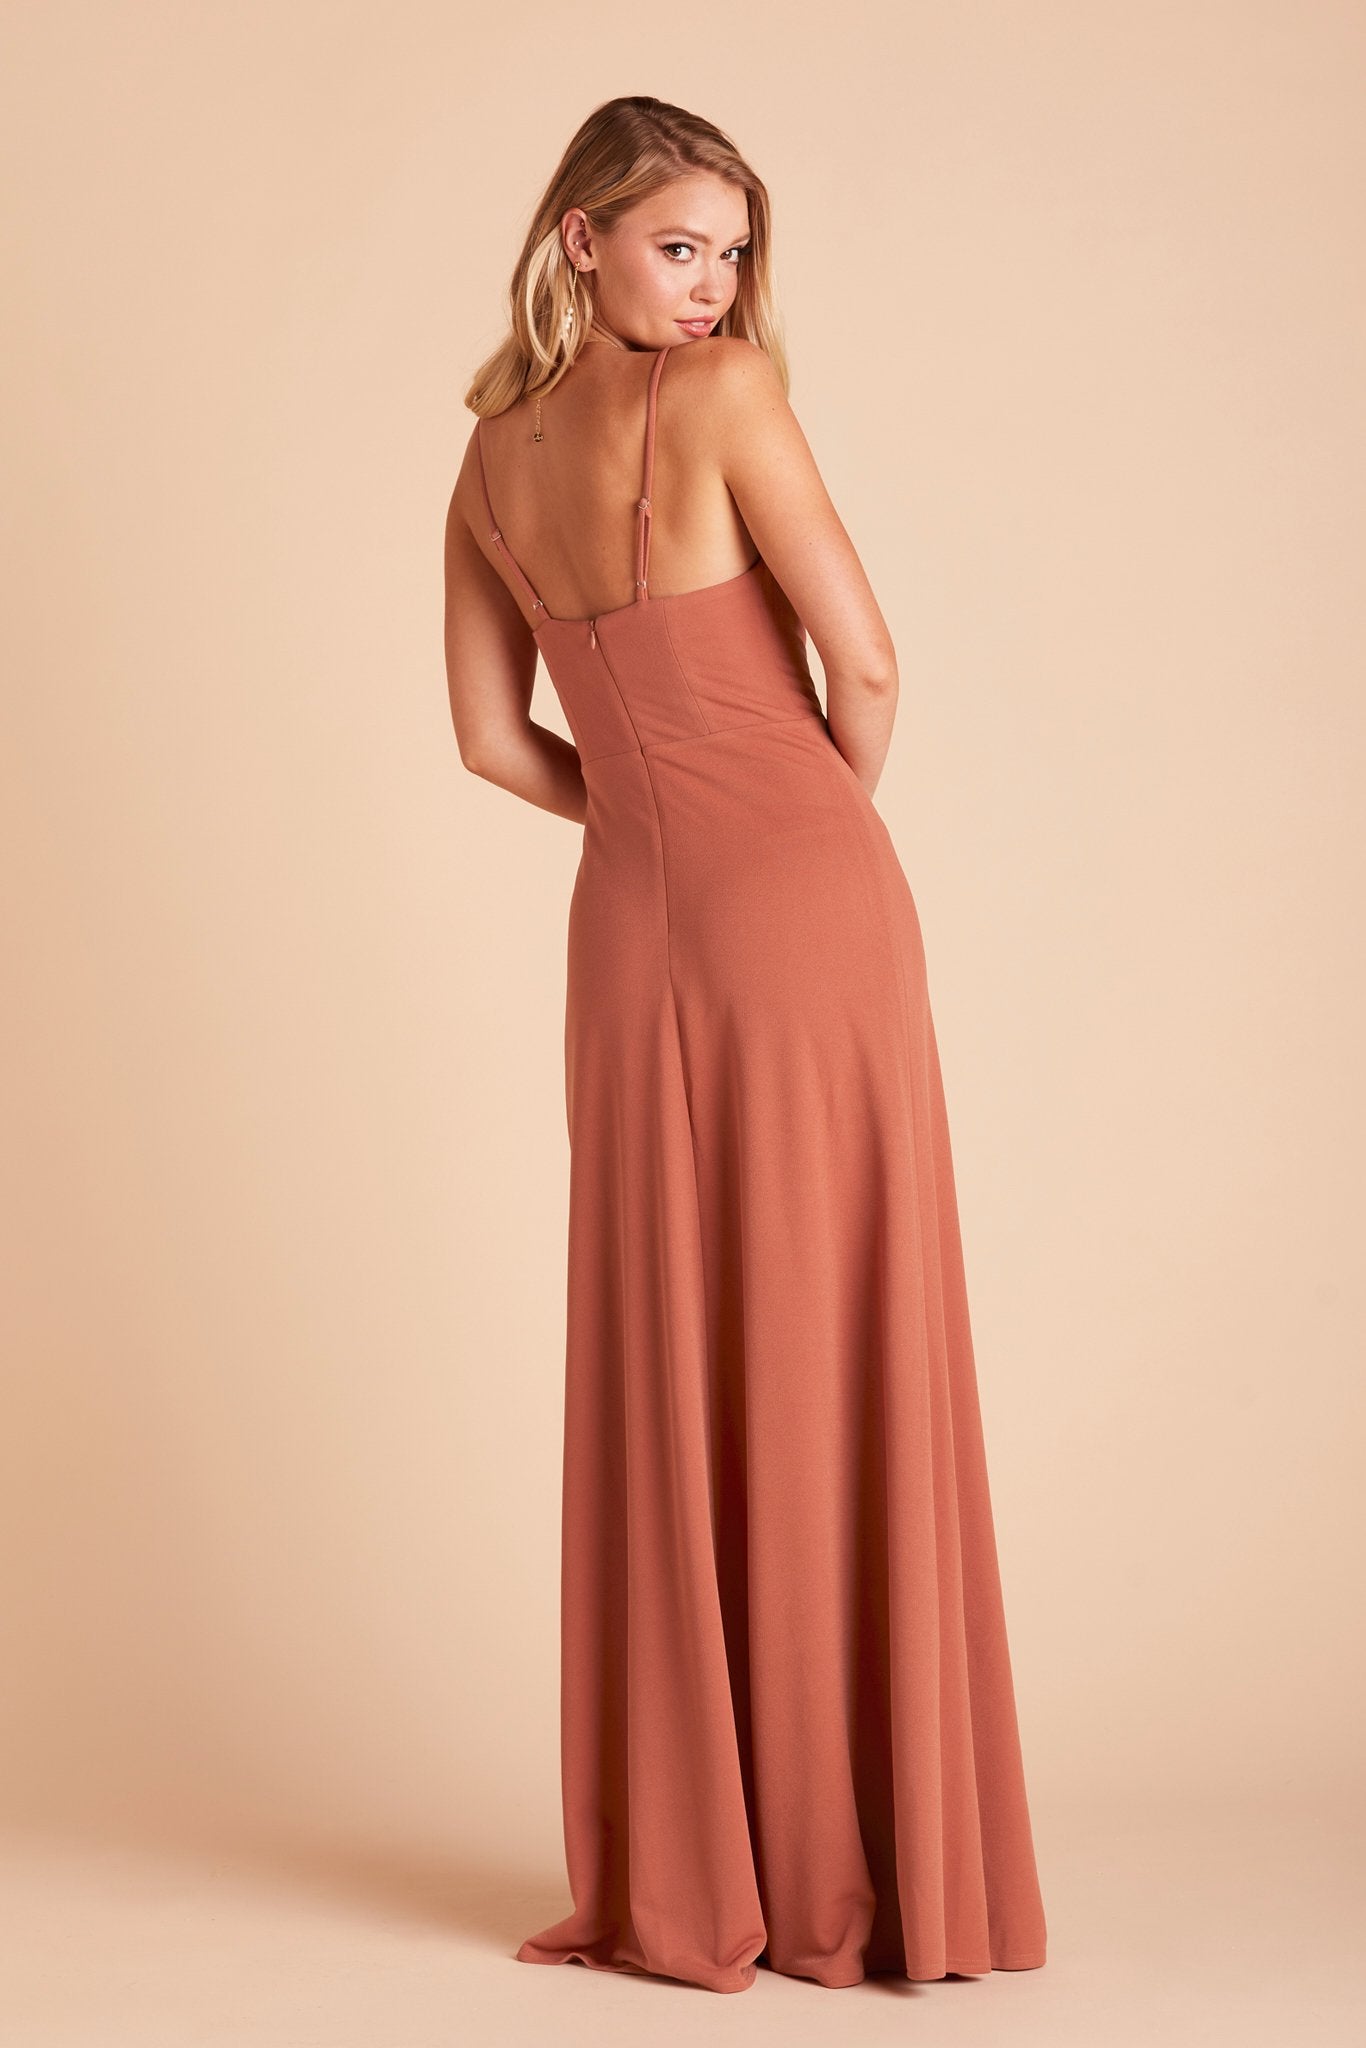 Ash bridesmaid dress in terracotta crepe by Birdy Grey, back view